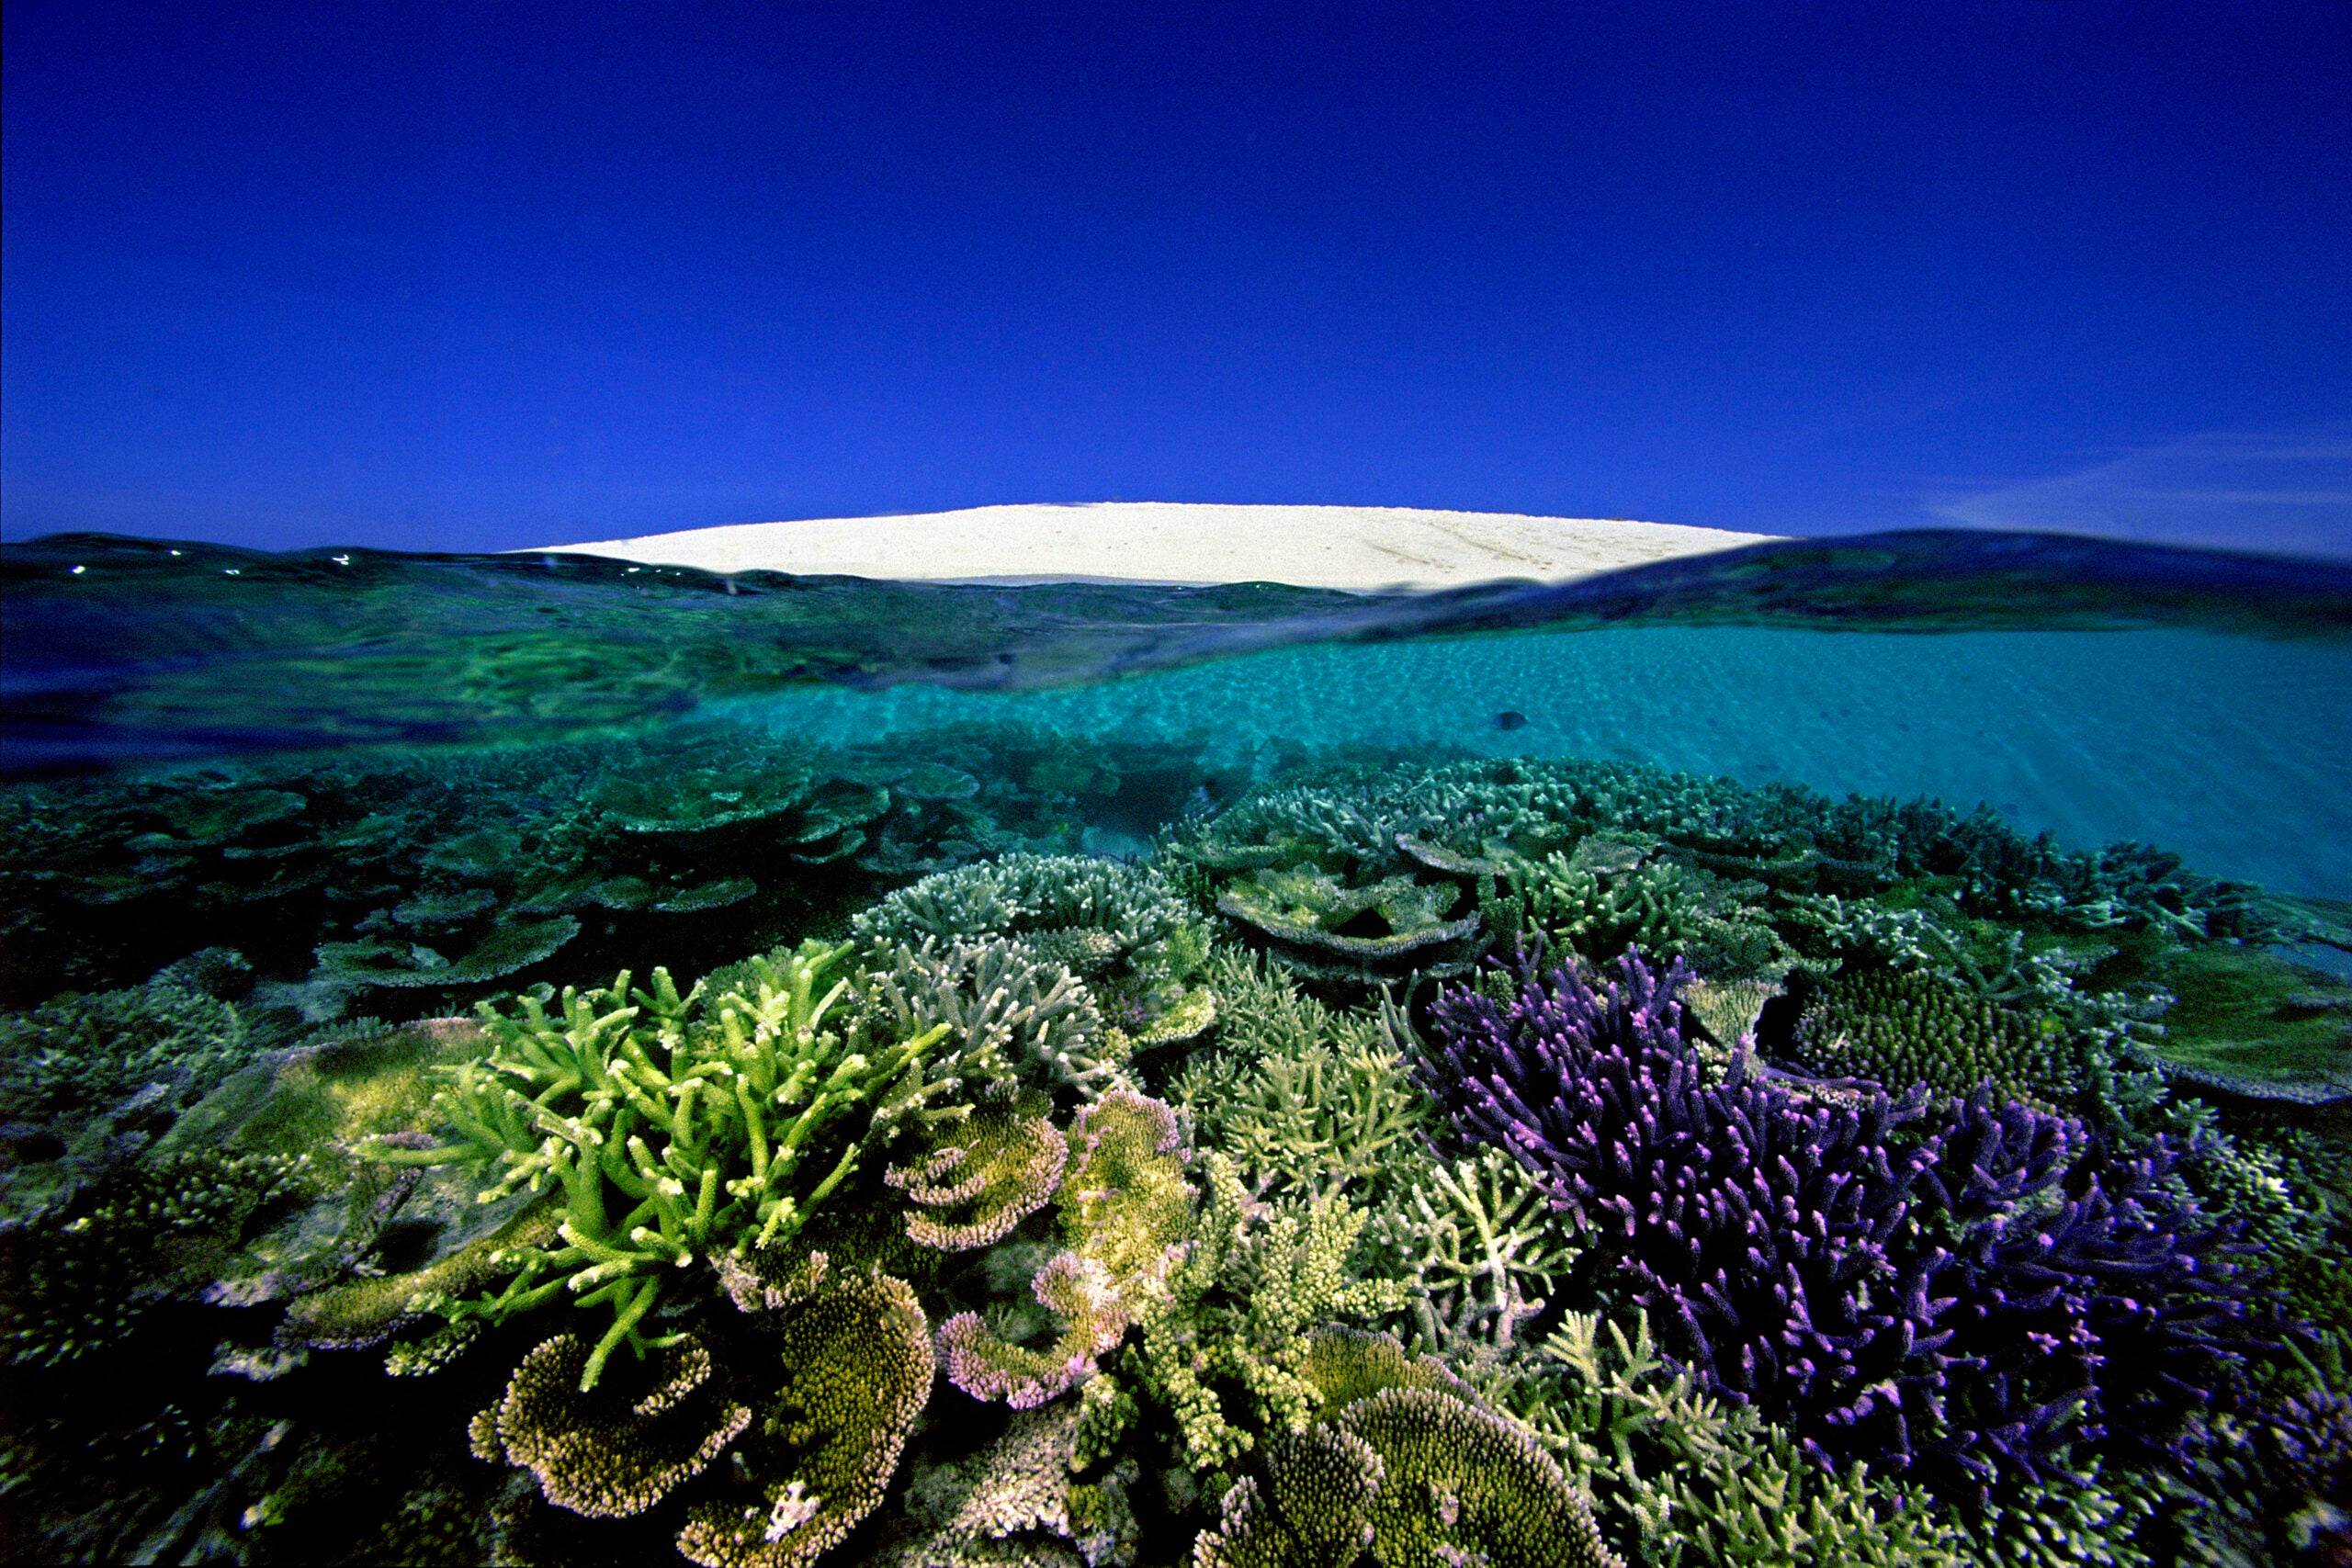 Reef front at Number 6 Sand Cay, Great Barrier Reef, Australia